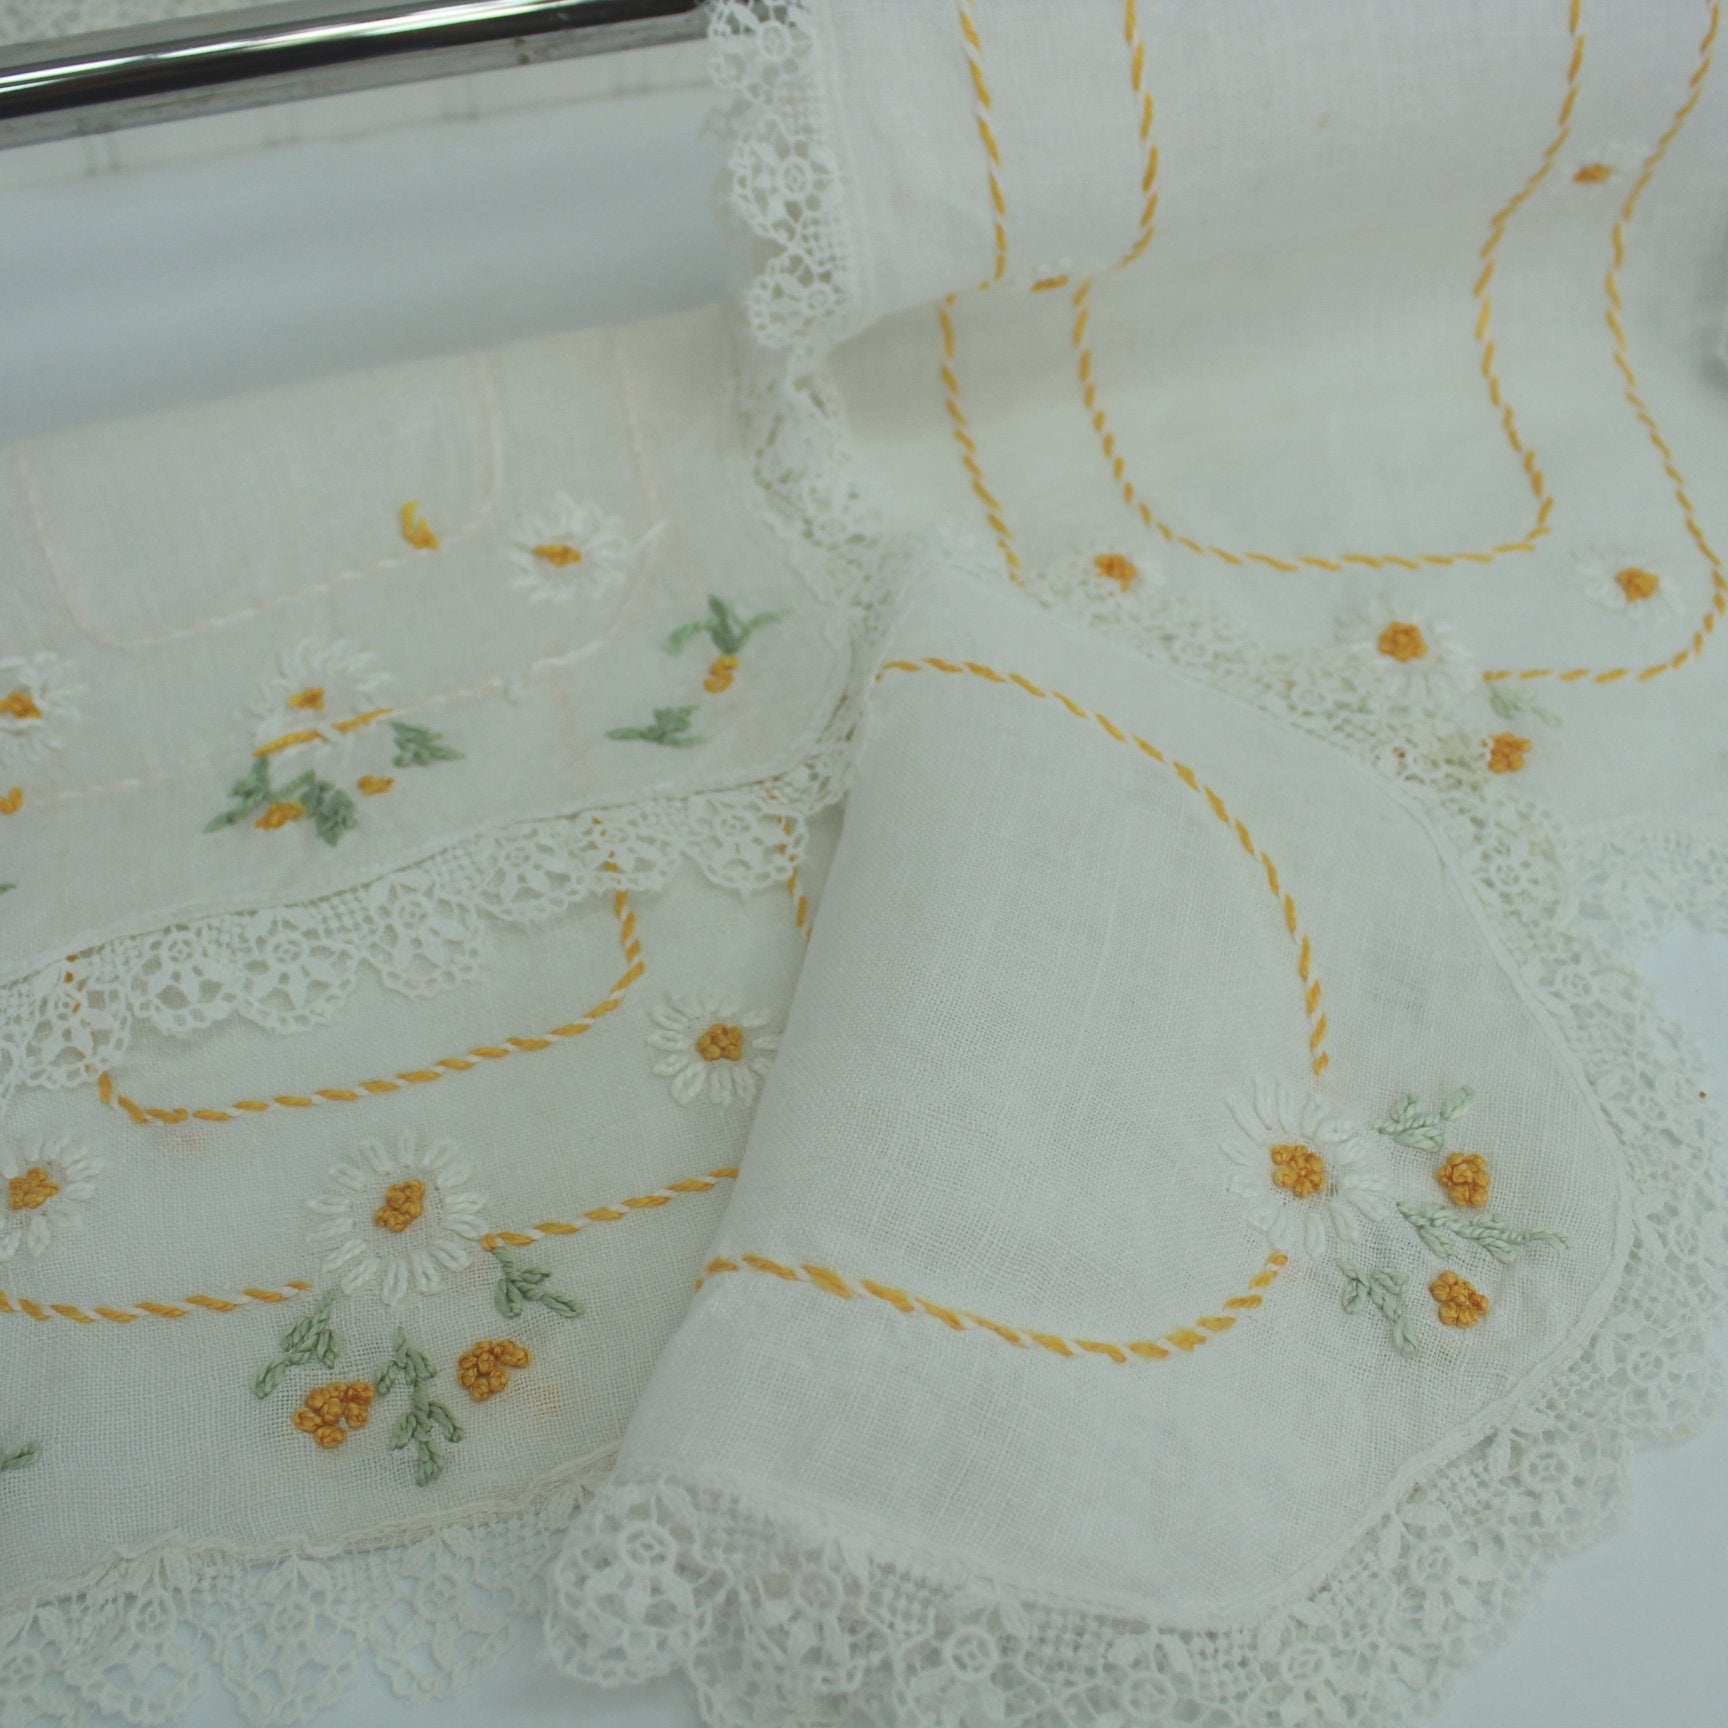 Collection 4 Embroidered Fine Linen Table Pieces White with Daisies Lace Elegant Vintage unique hemlines with lace